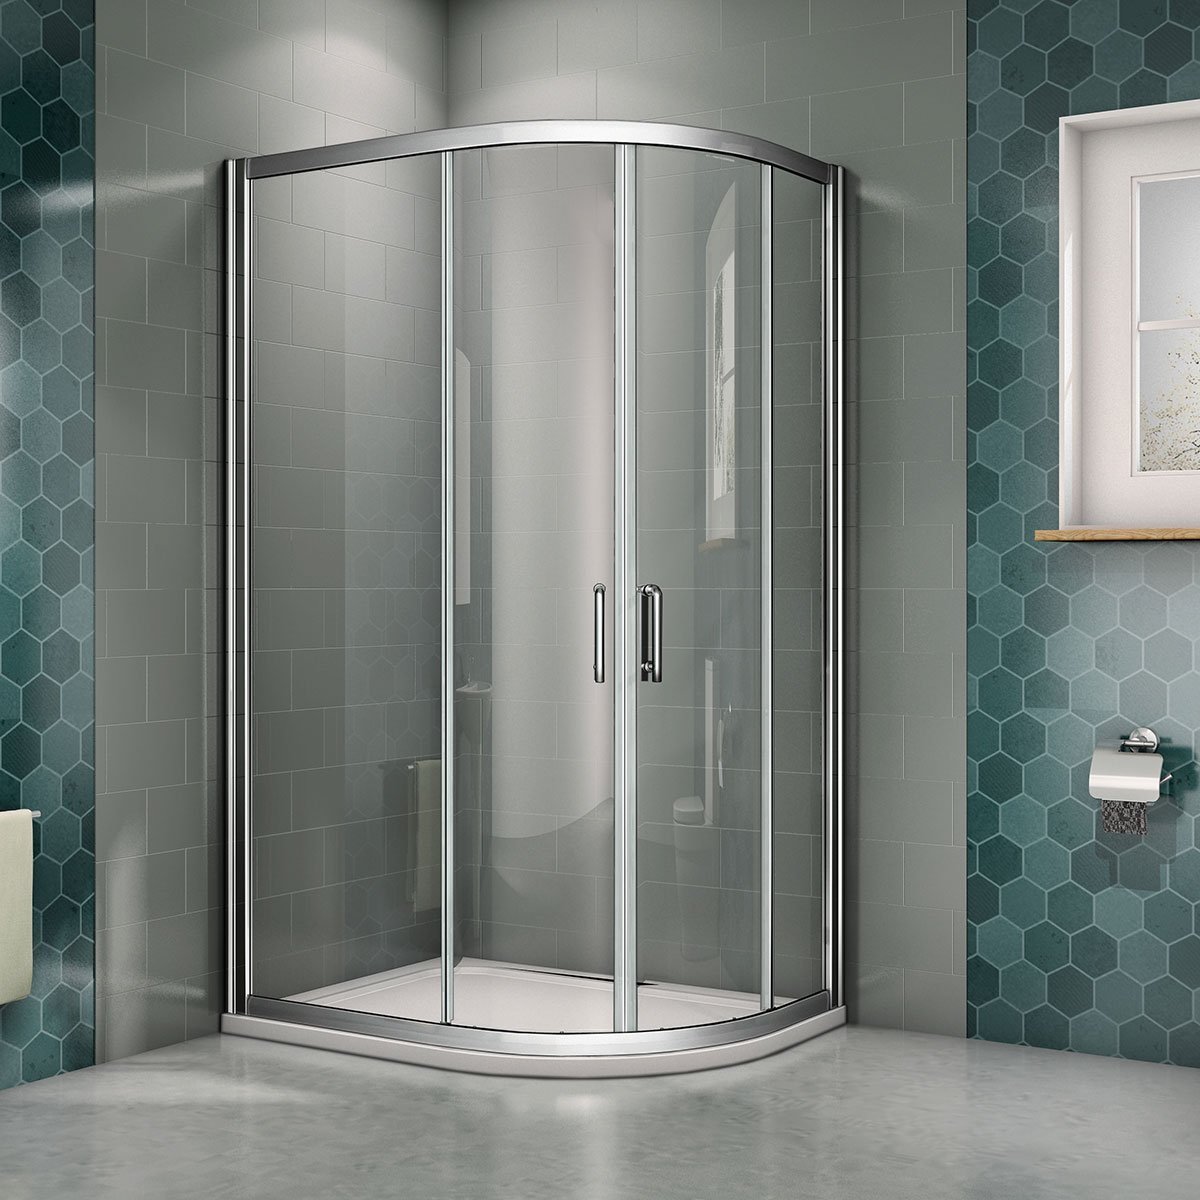 6mm easy clean glass quadrant shower enclosure, No tray,clearance